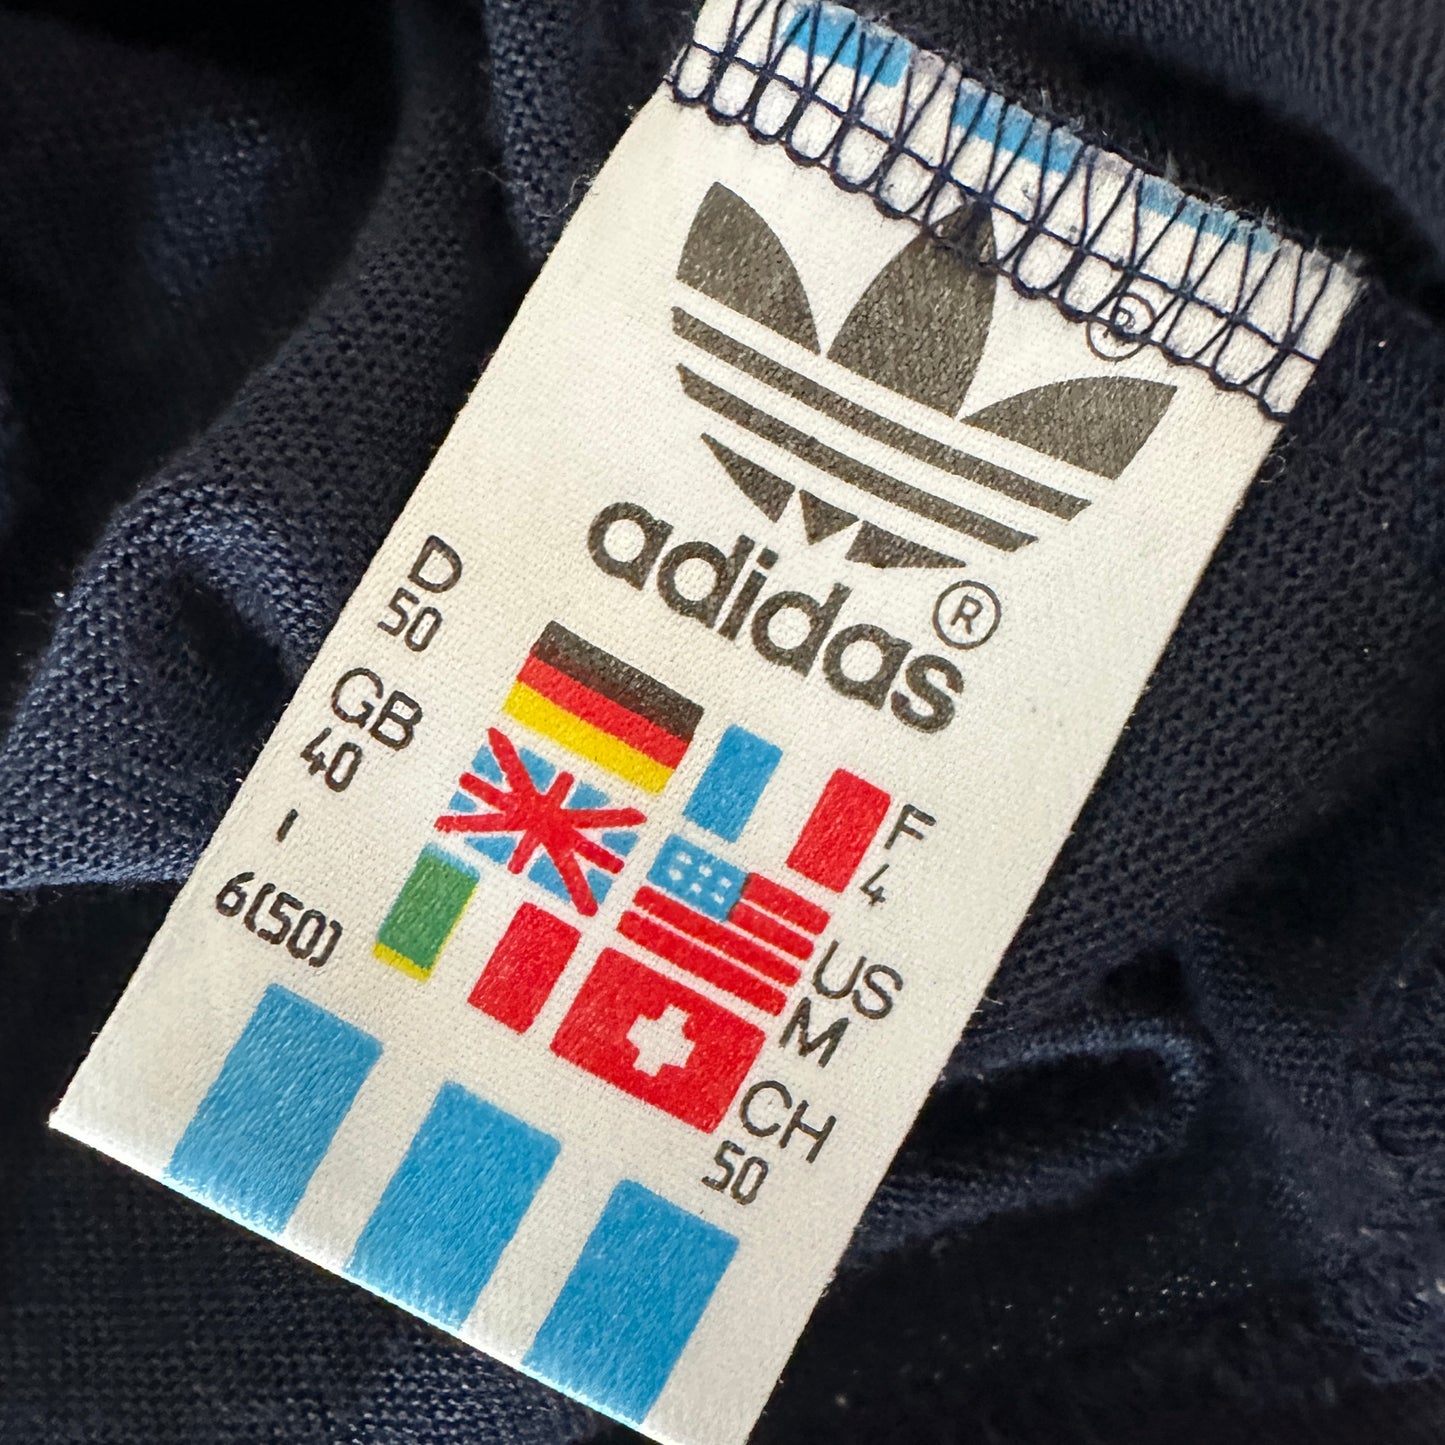 Adidas Vintage 80s Tennis Polo Shirt - 50 / L - Made in West Germany